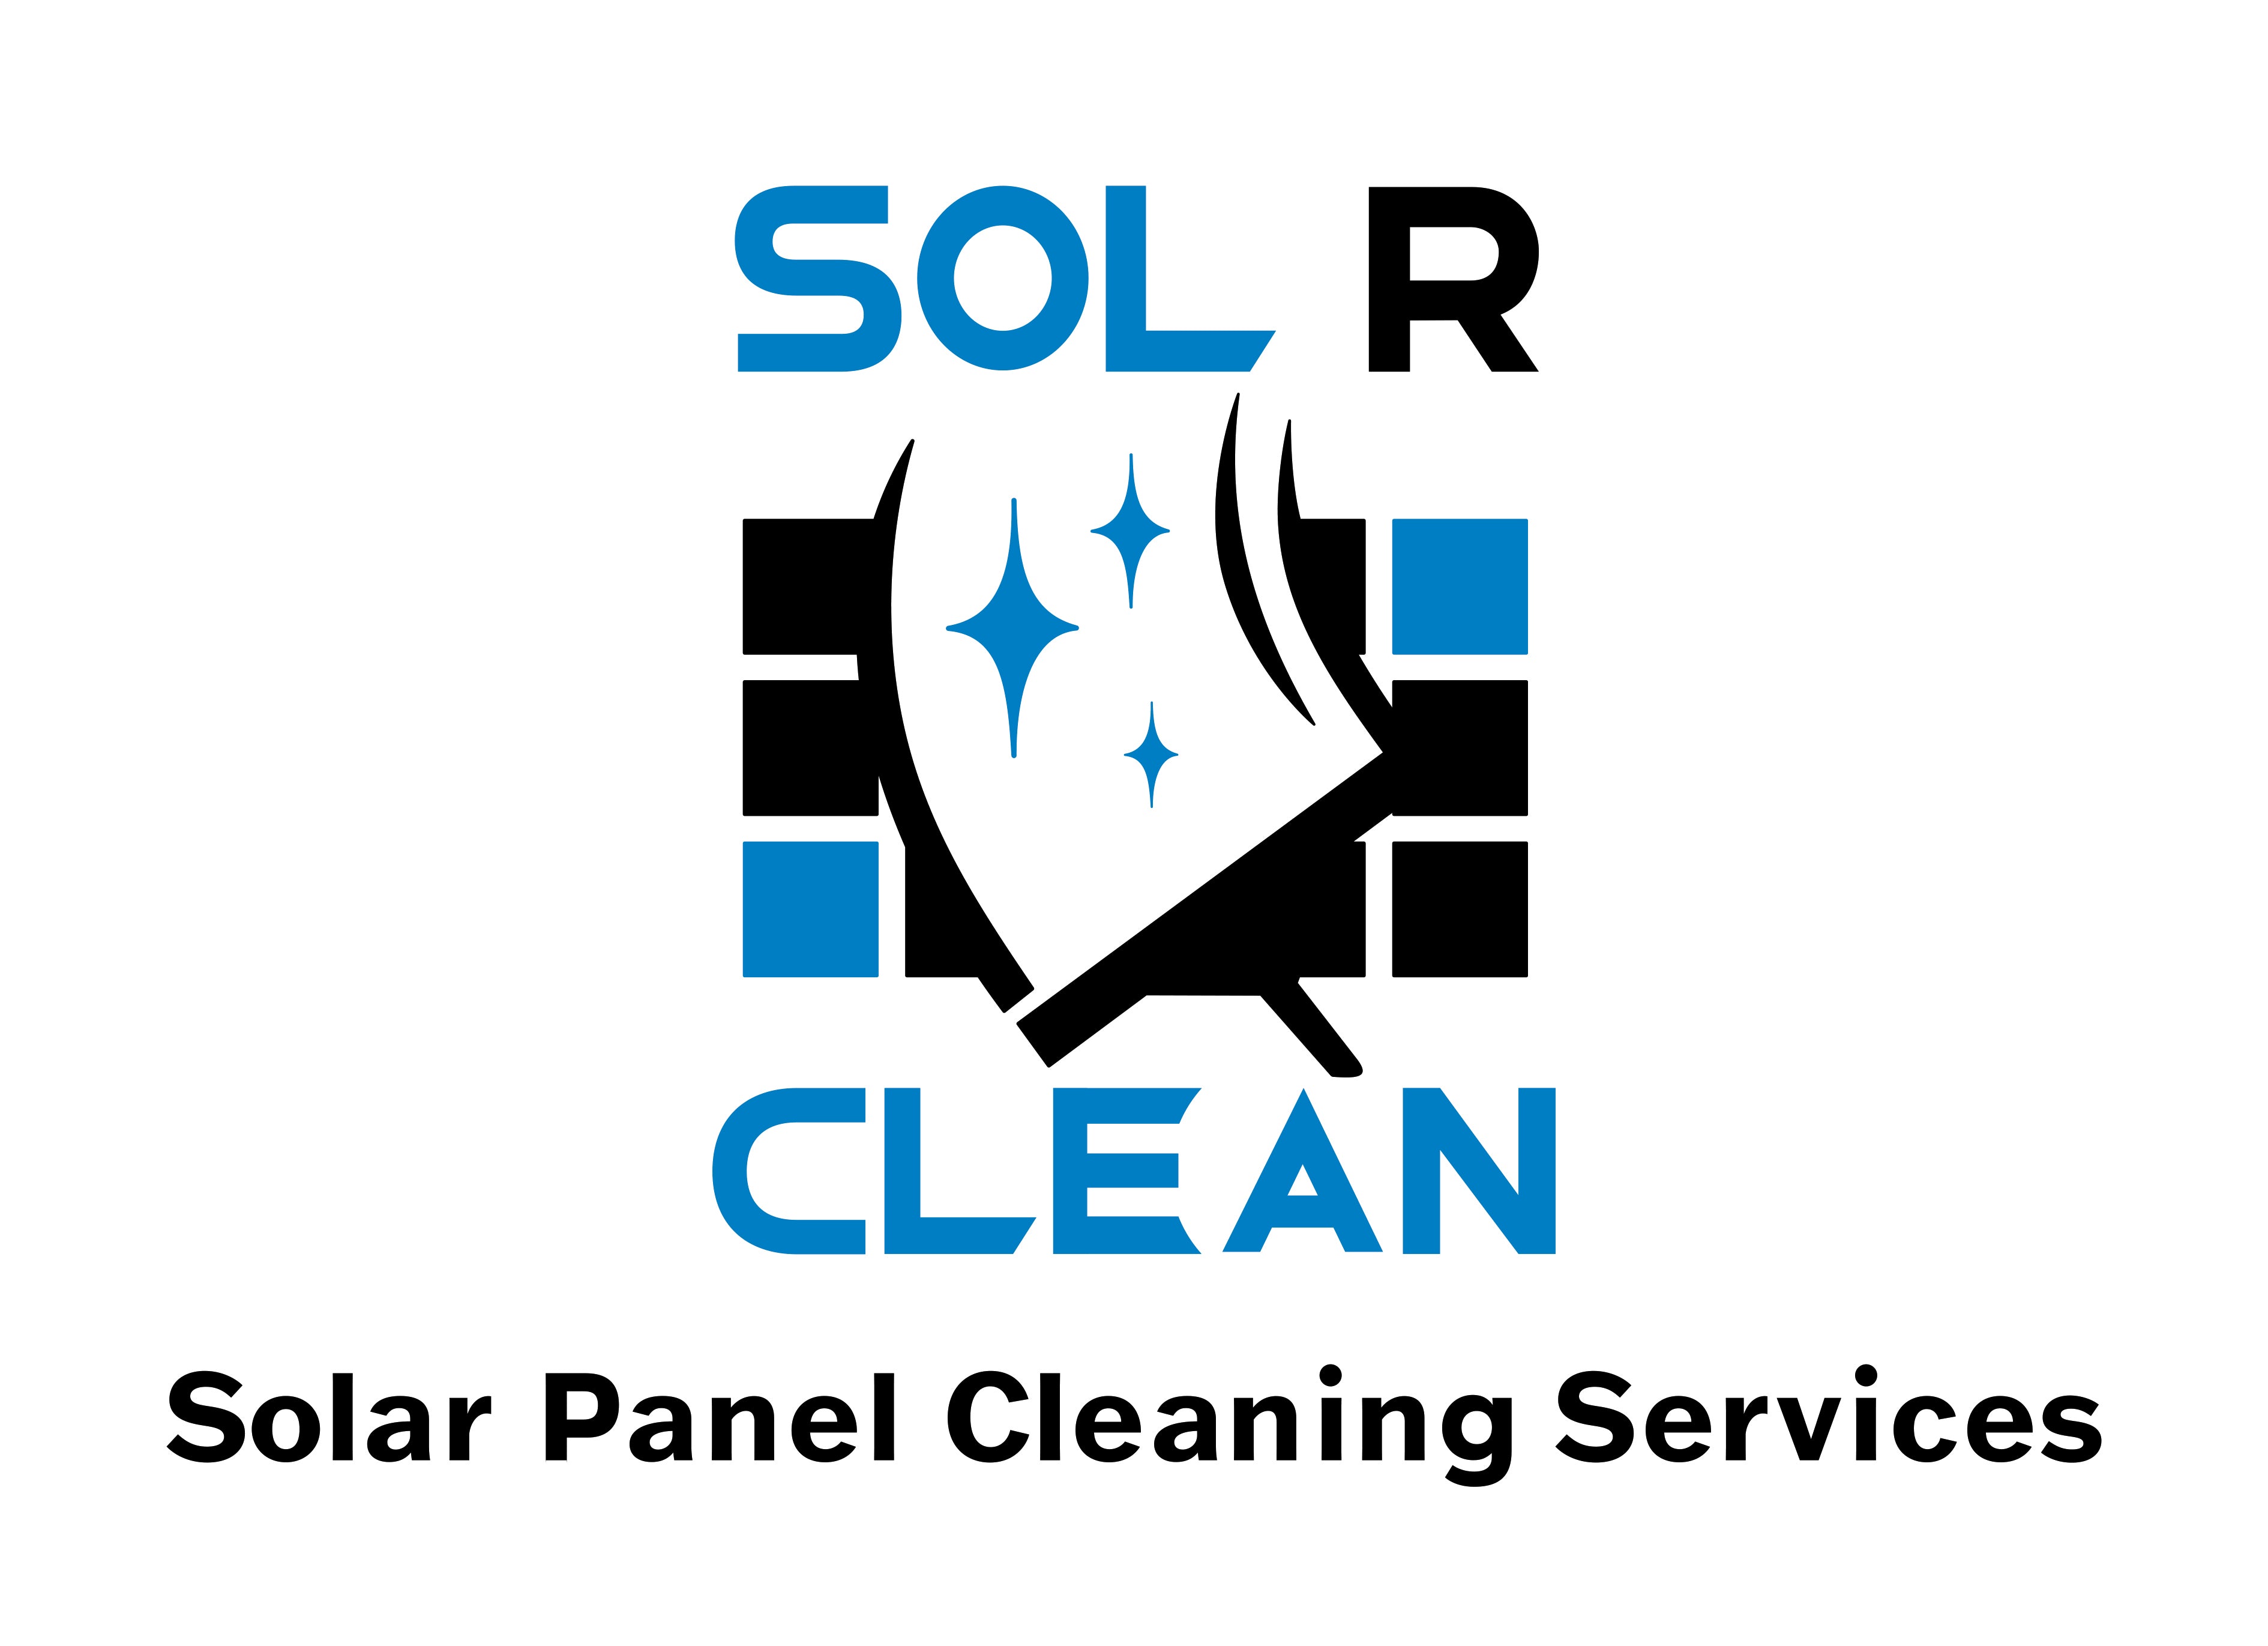 Sol R Clean - Solar Panel Cleaning Services